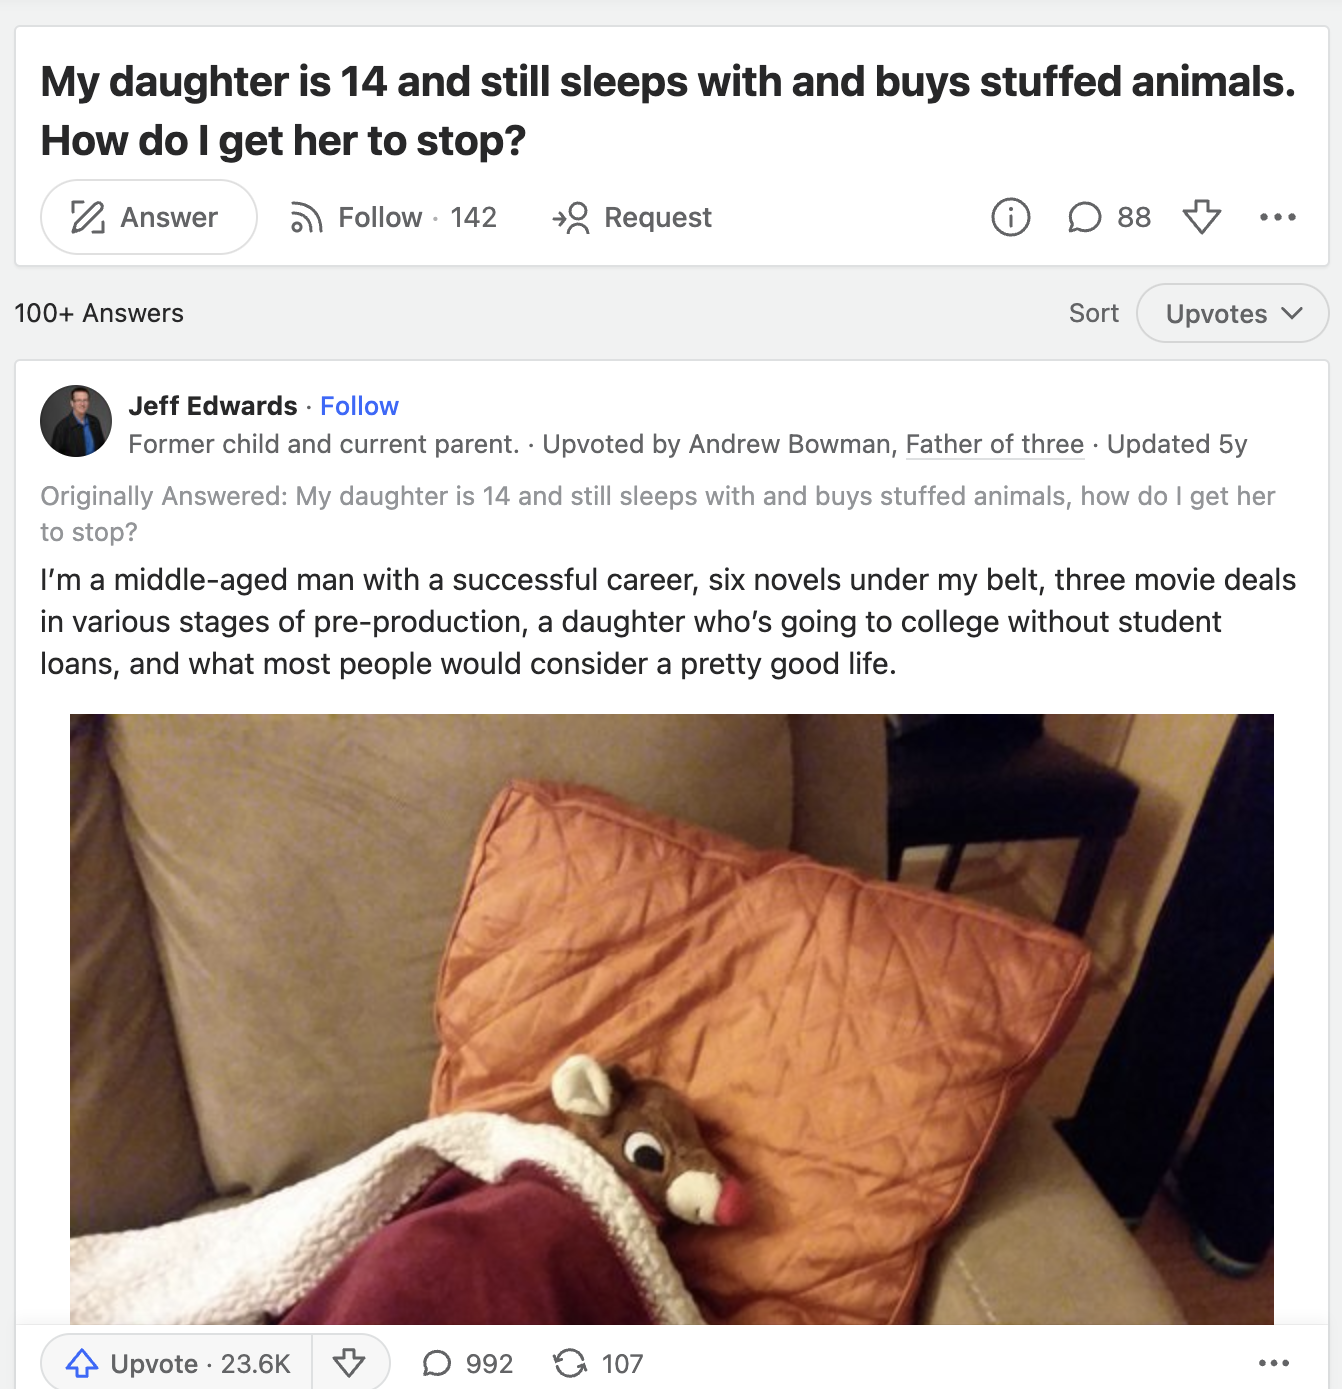 screenshot - My daughter is 14 and still sleeps with and buys stuffed animals. How do I get her to stop? Answer 142 Request 100 Answers 88 Sort Upvotes Jeff Edwards Former child and current parent. Upvoted by Andrew Bowman, Father of three Updated 5y Orig